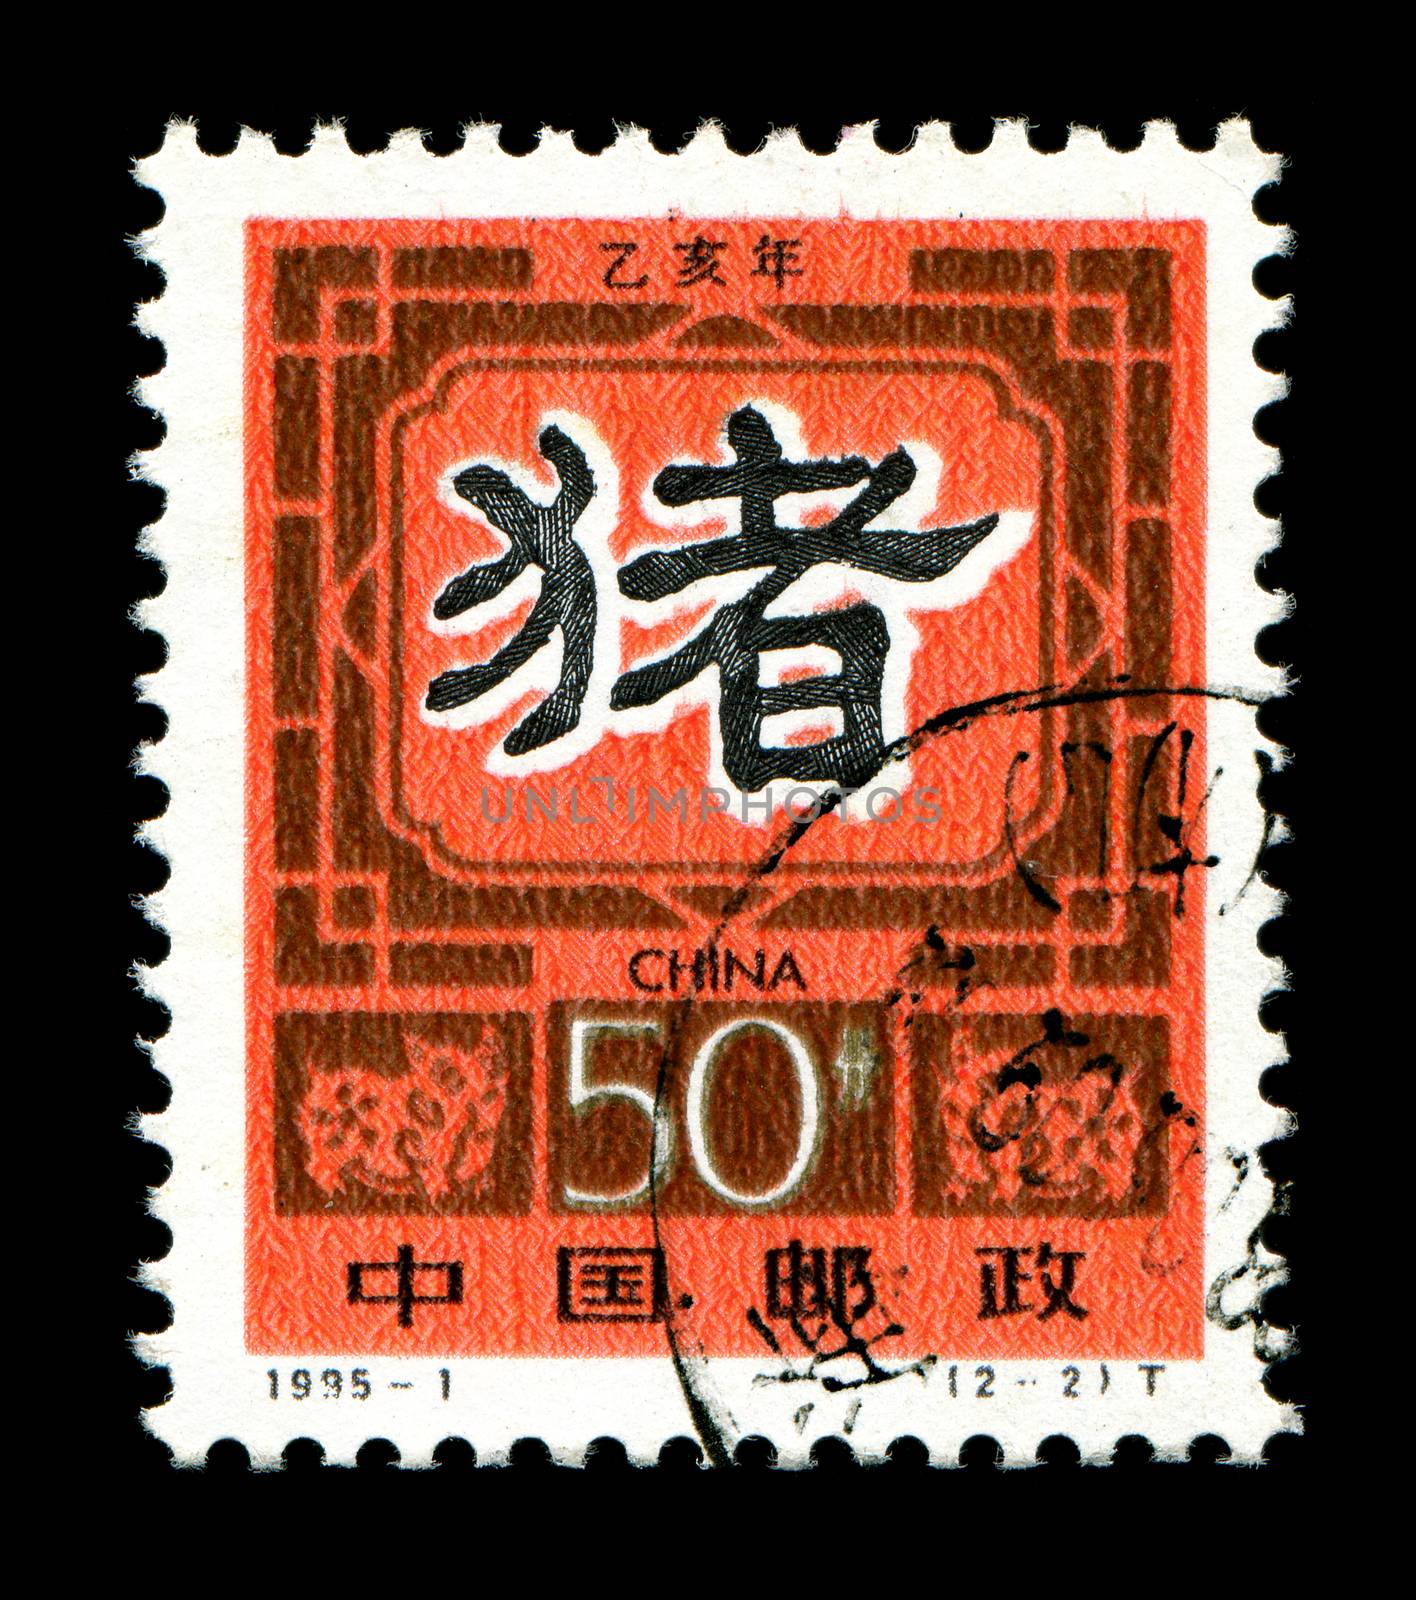 Year of the Boar in postage stamp by myyaym